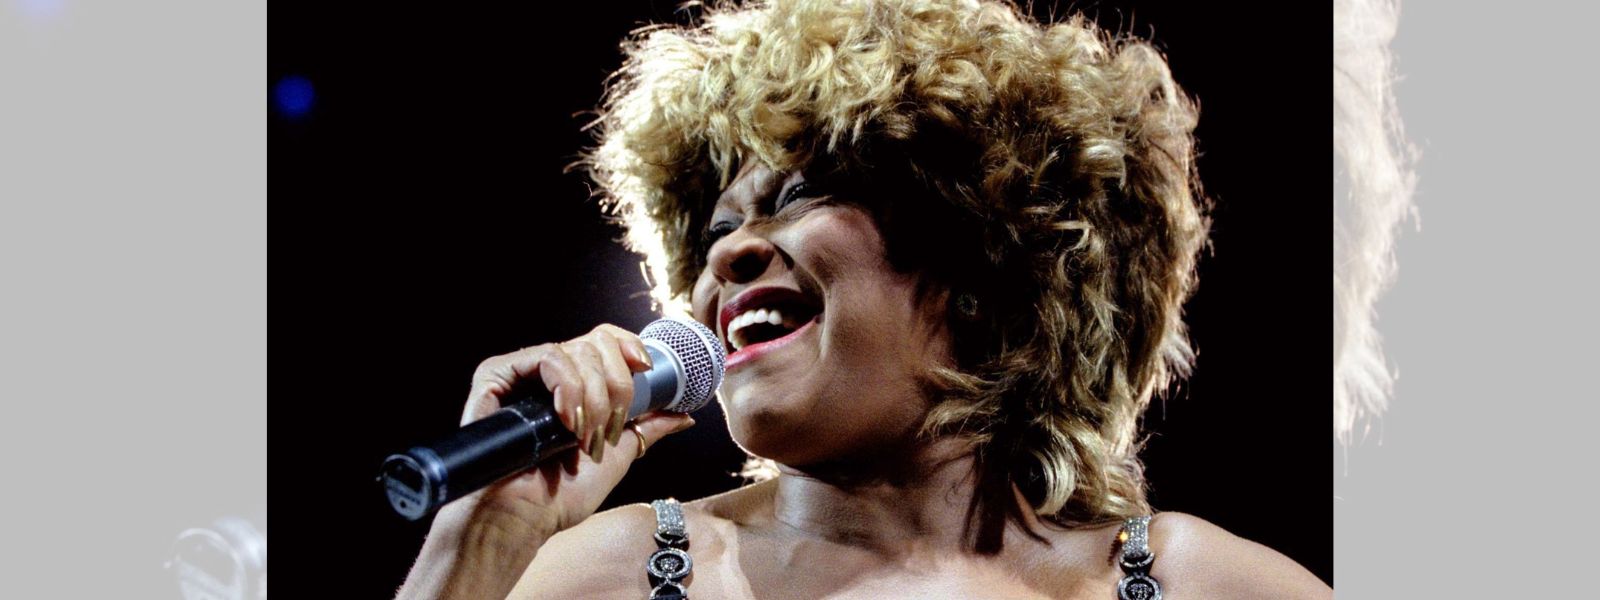 Queen of Rock and Roll Tina Turner dies aged 83